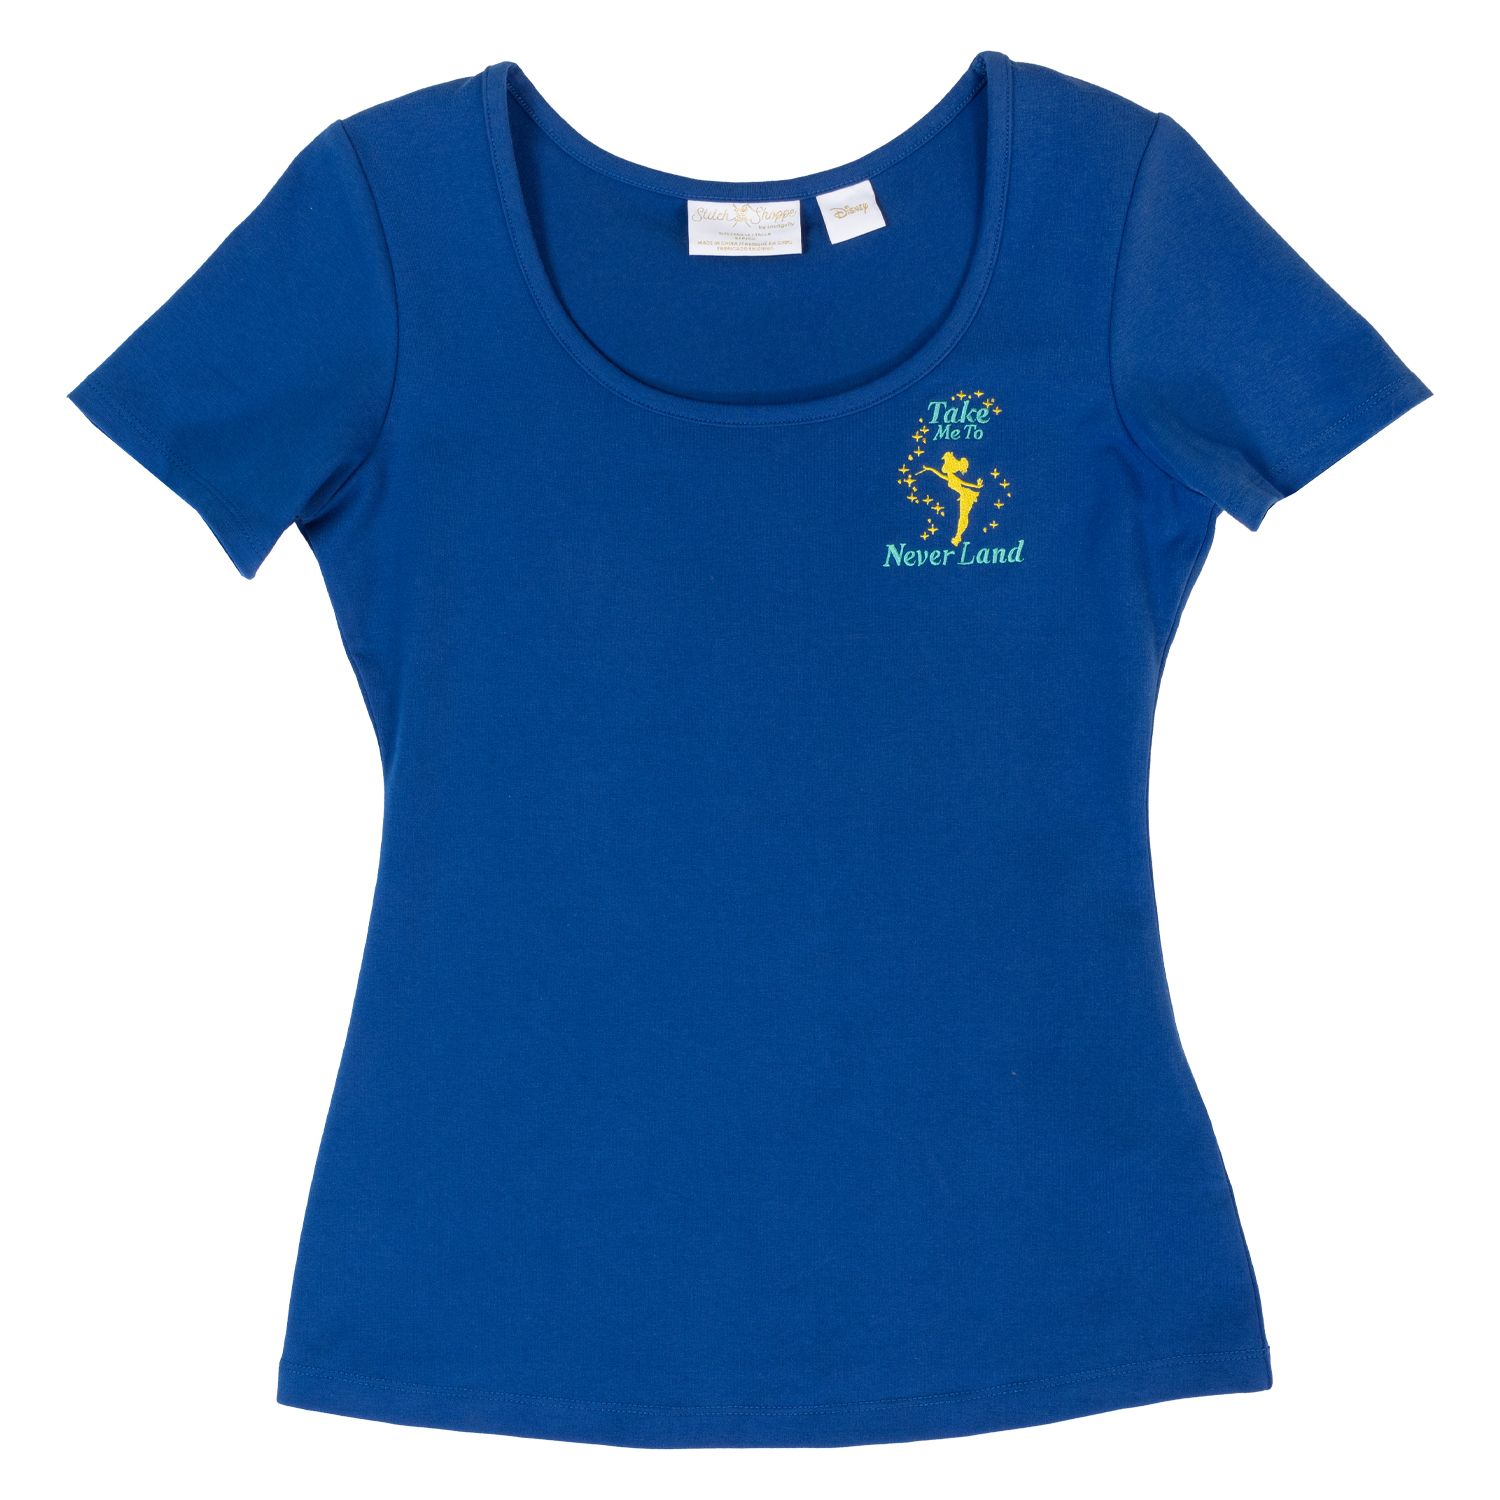 tinkerbell kelly shirt loungefly collection